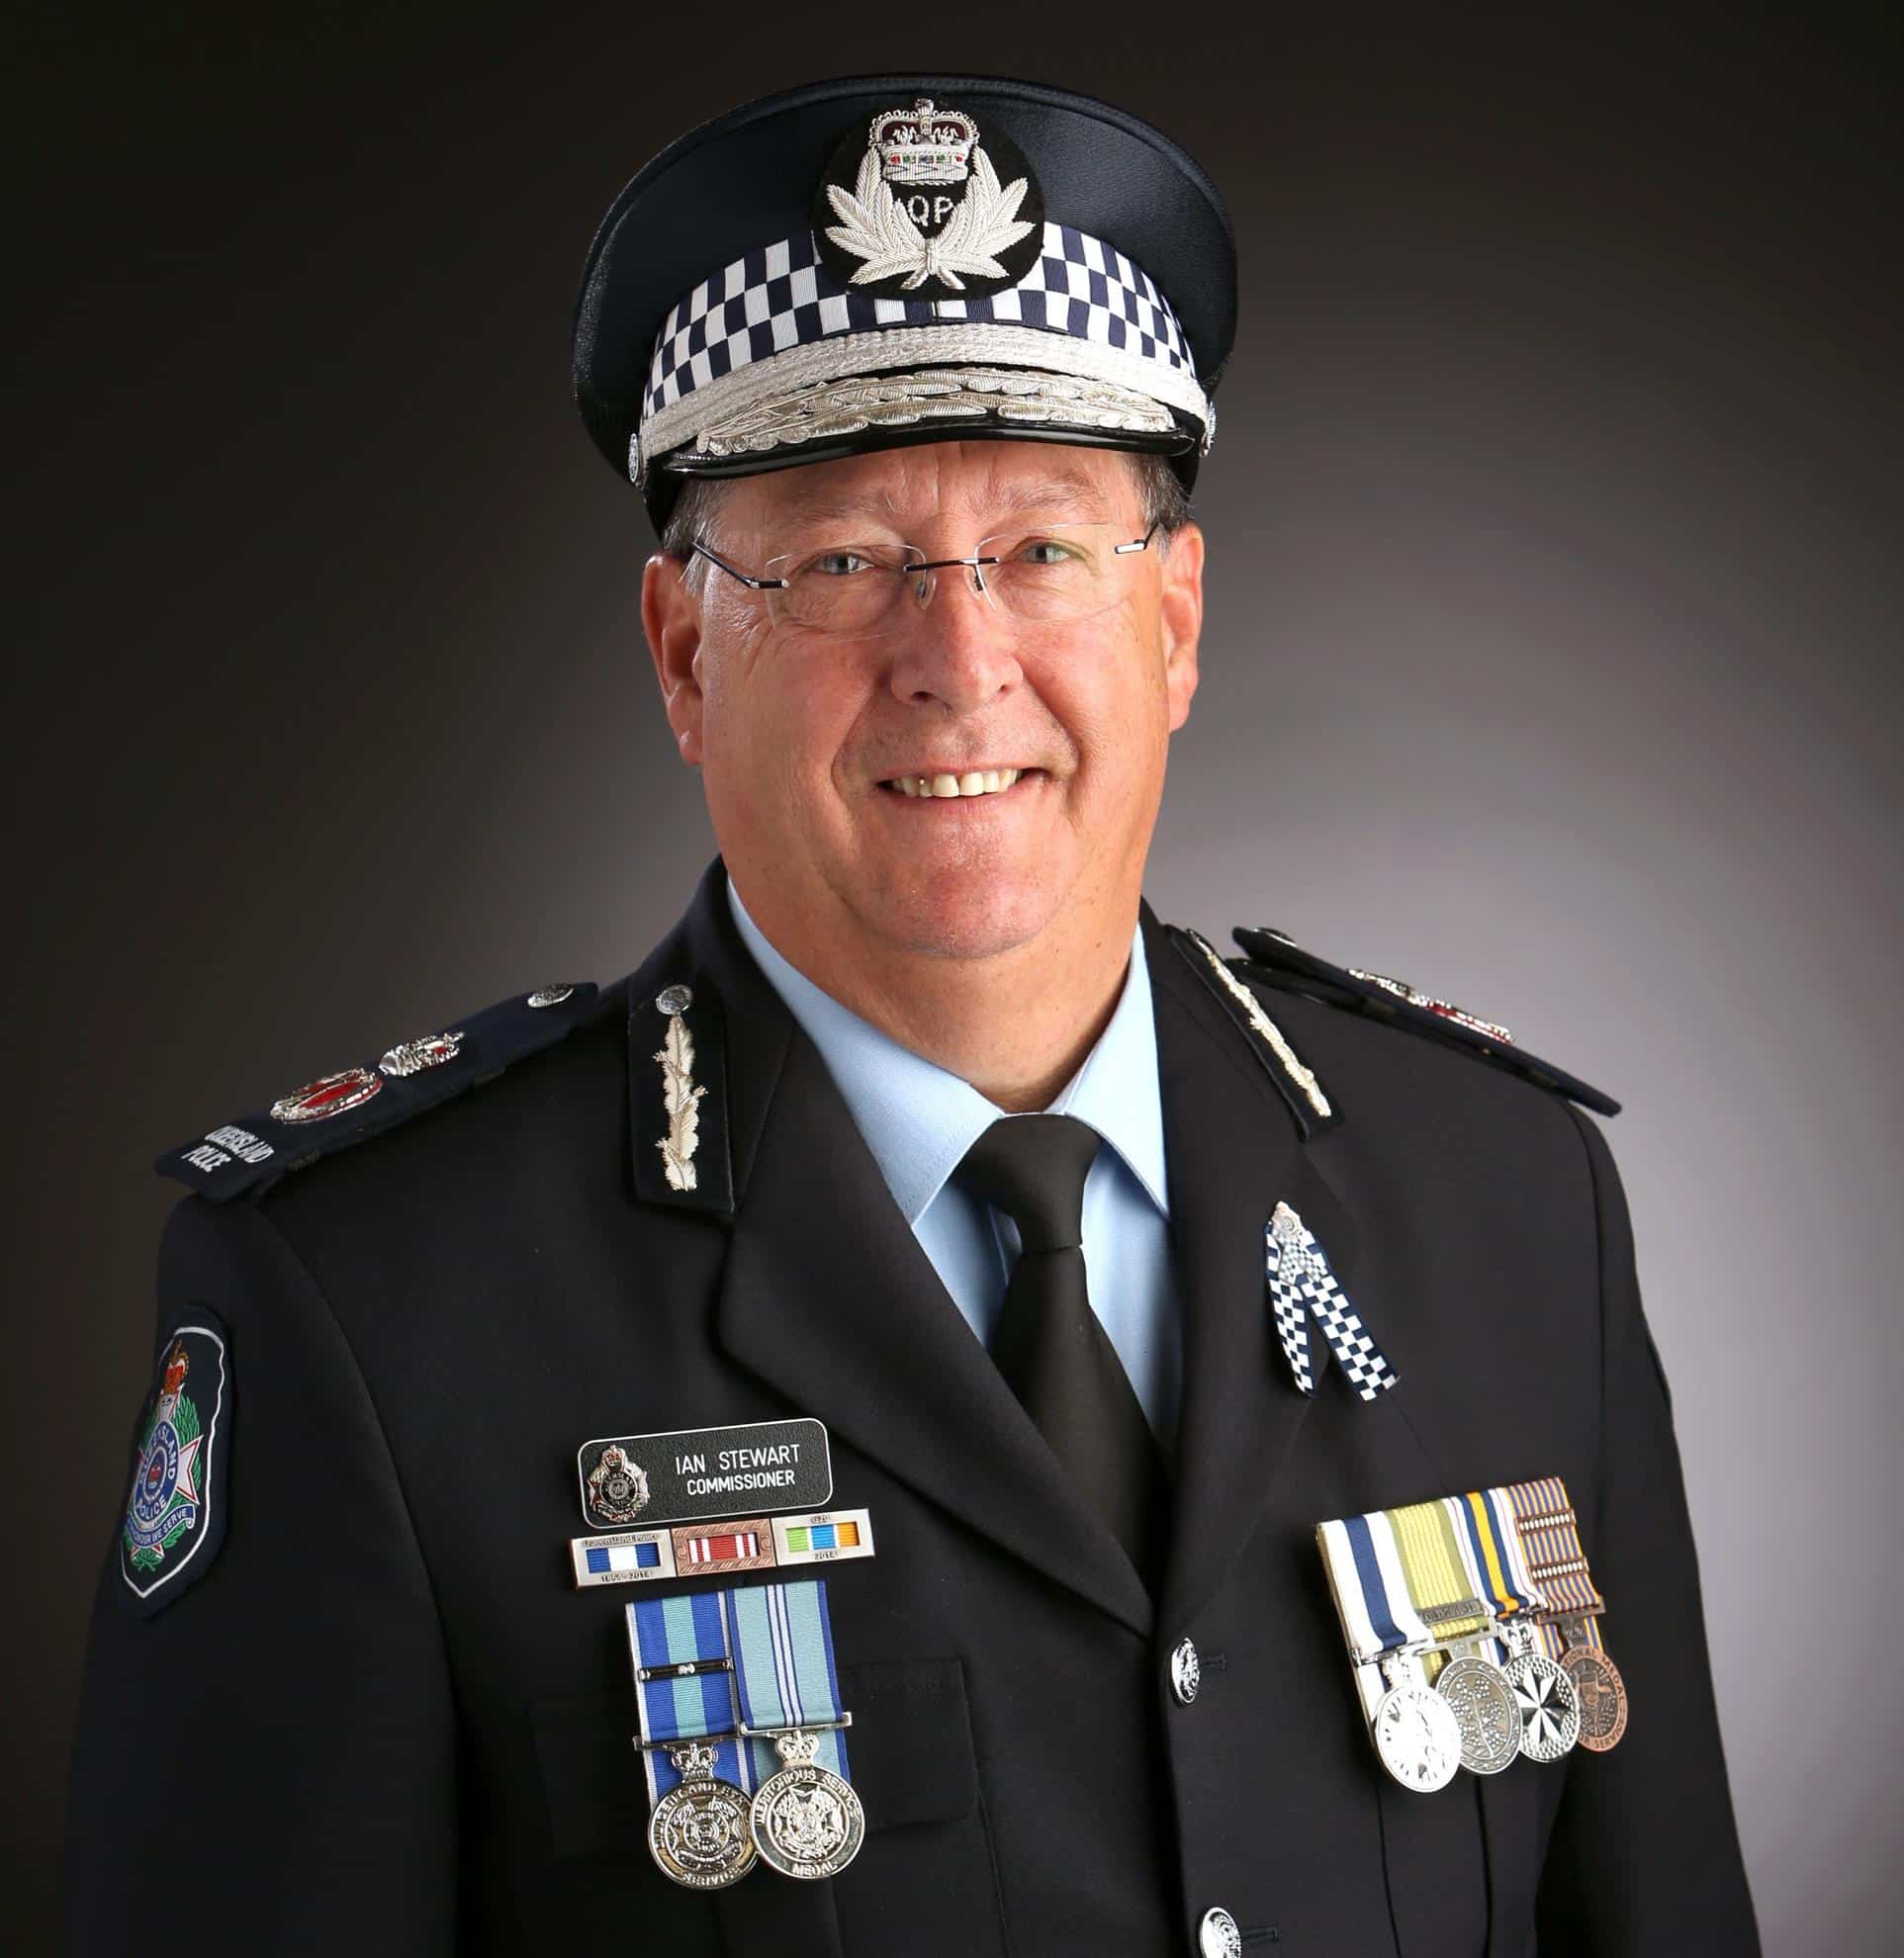 Queensland Commissioner of Police Ian Stewart to be Guest at RCoB ...